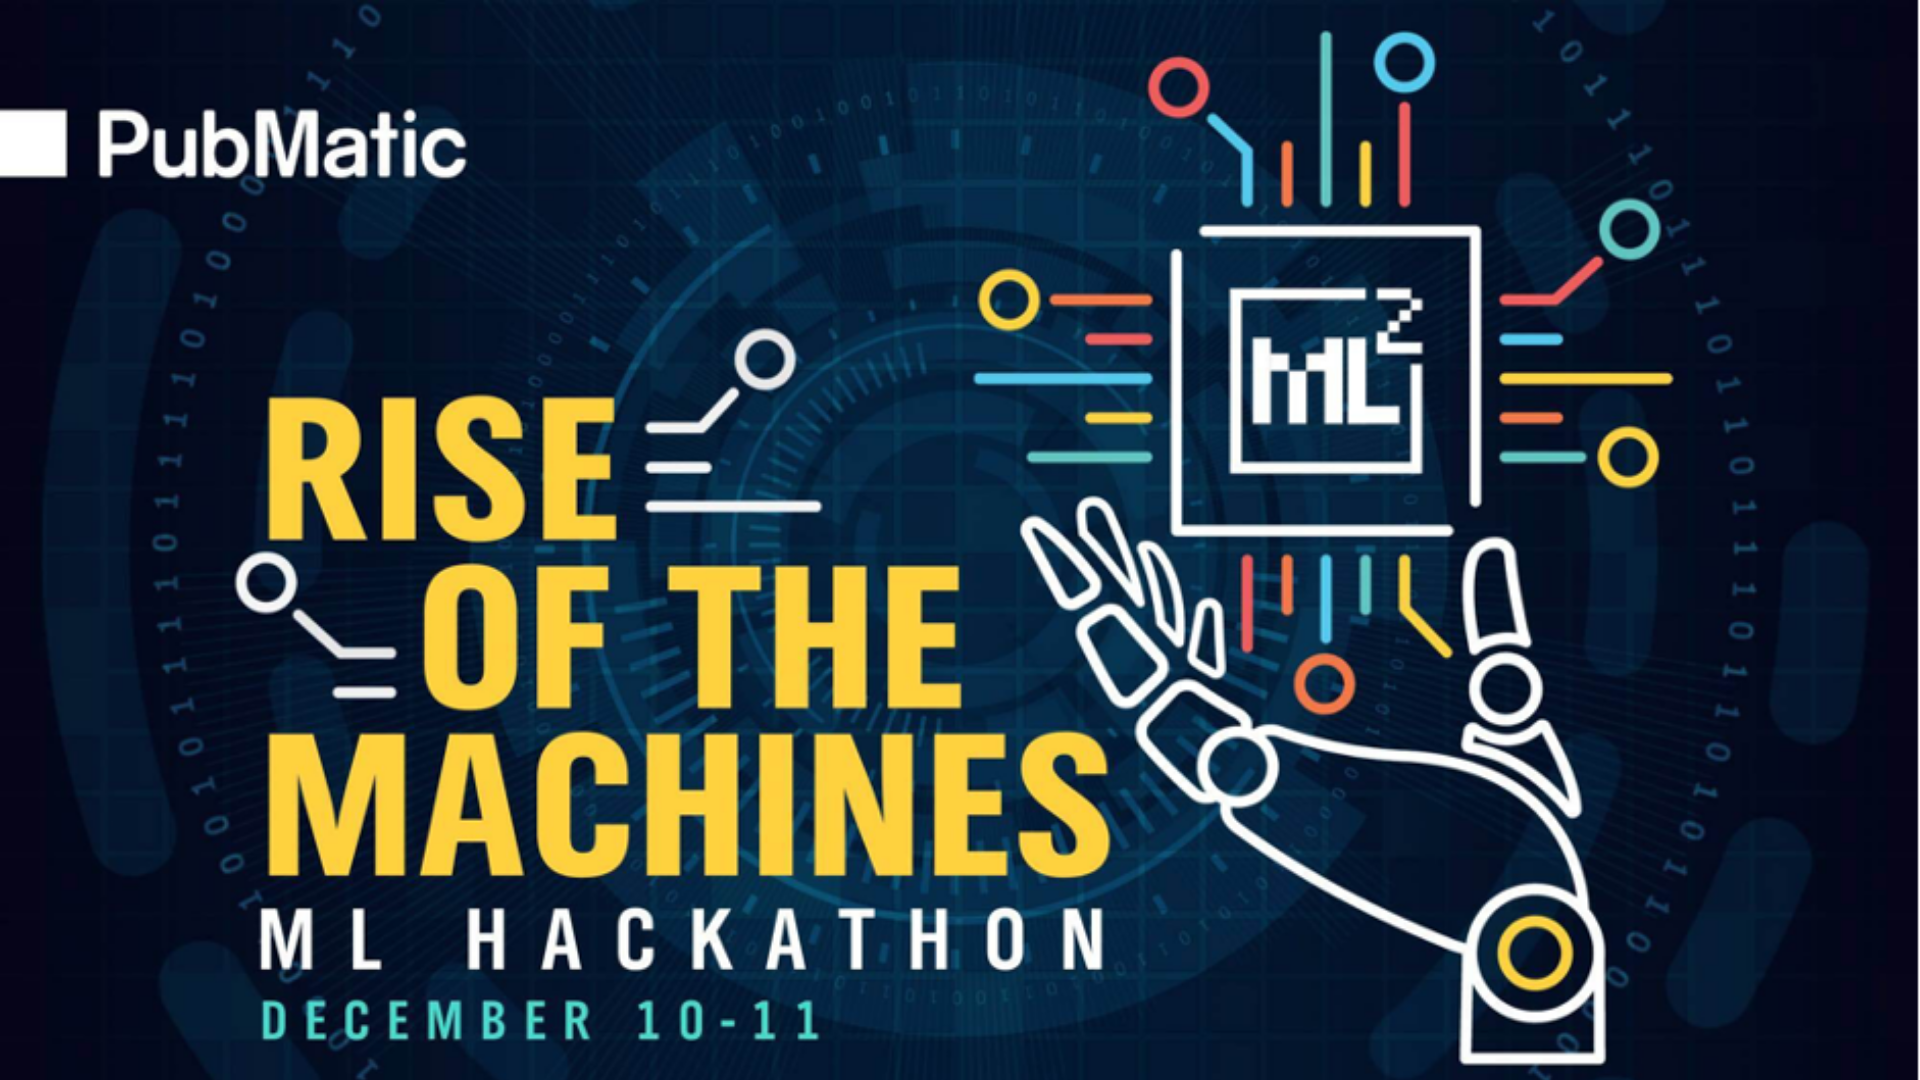 A graphic of a robotic hand holding a box with the letter "ML^2" and the text "Rise of the Machines ML Hackathon December 10-11" is next to it.